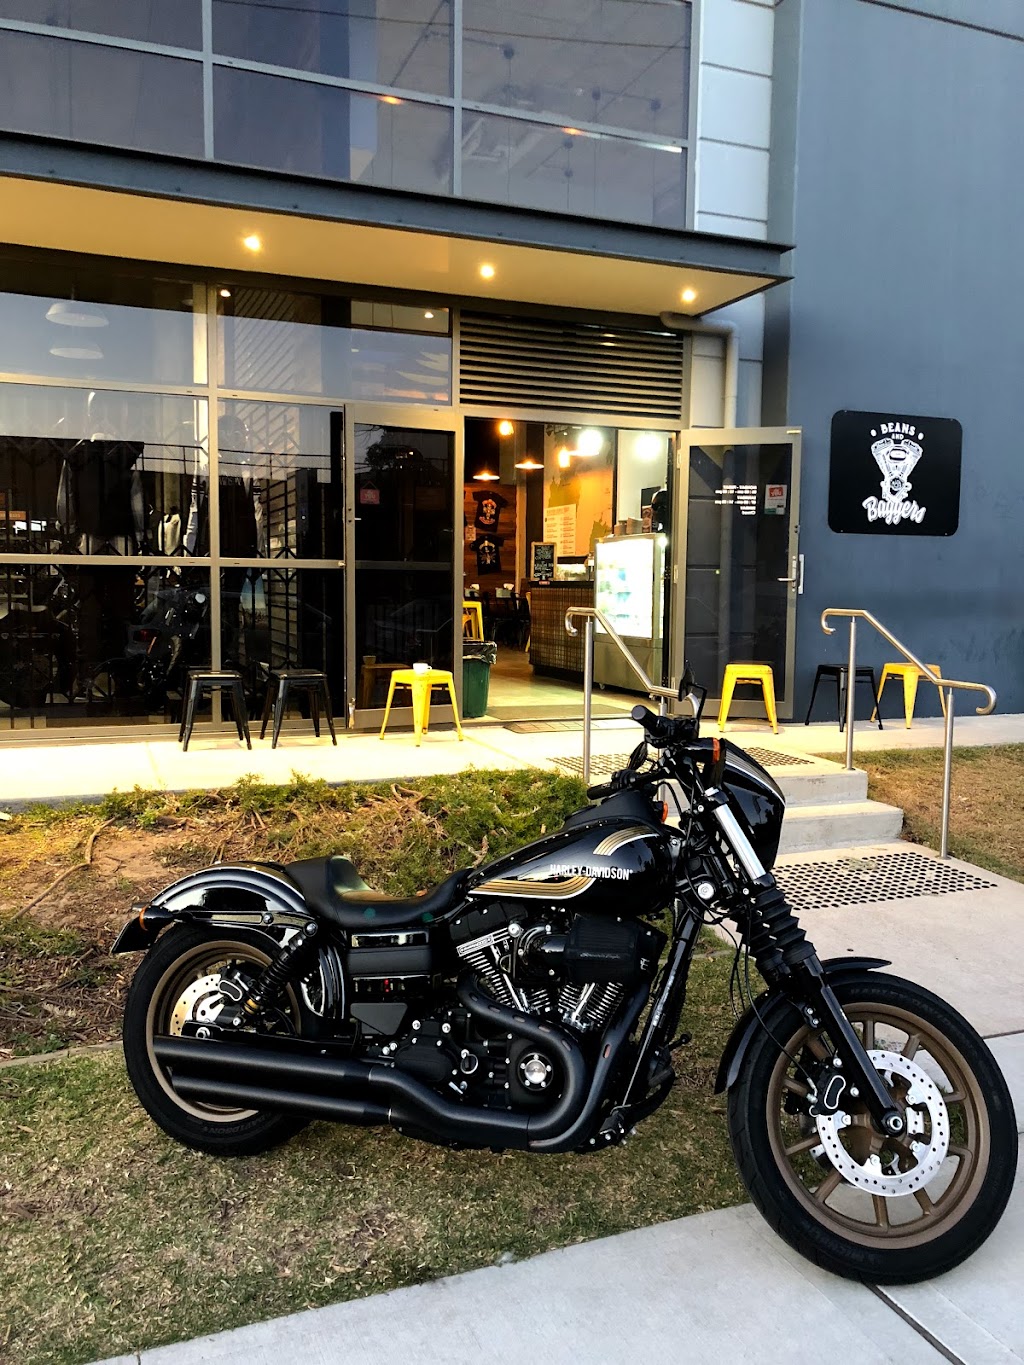 Beans And Baggers | cafe | 170 Harbord Rd, Brookvale NSW 2100, Australia | 0410724240 OR +61 410 724 240